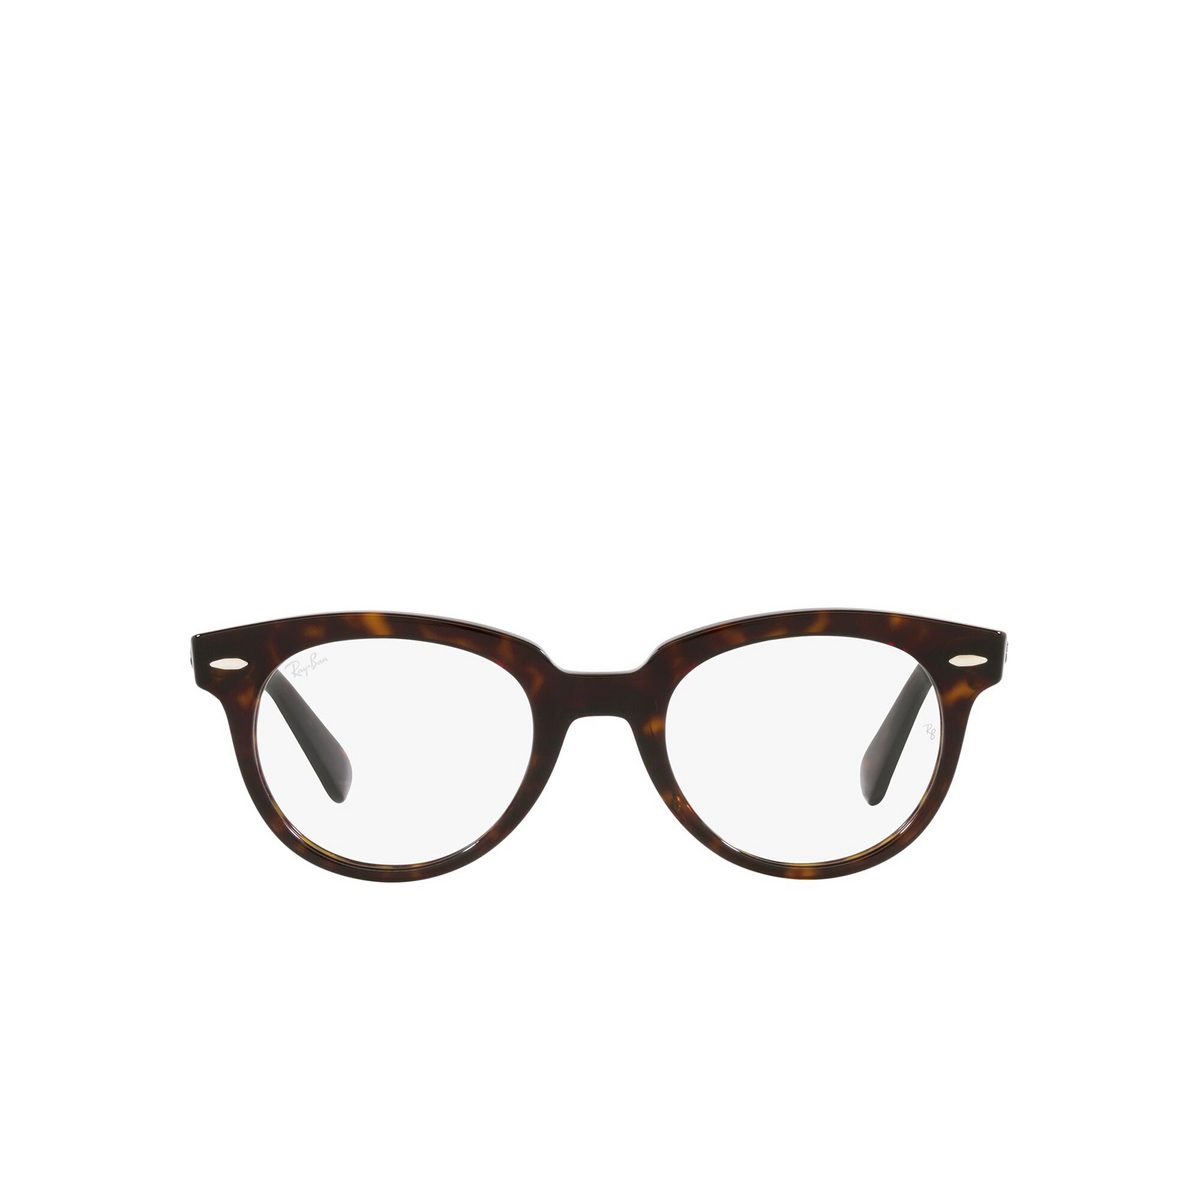 Ray-Ban® Round Eyeglasses: RX2199V color Havana 2012 - front view.